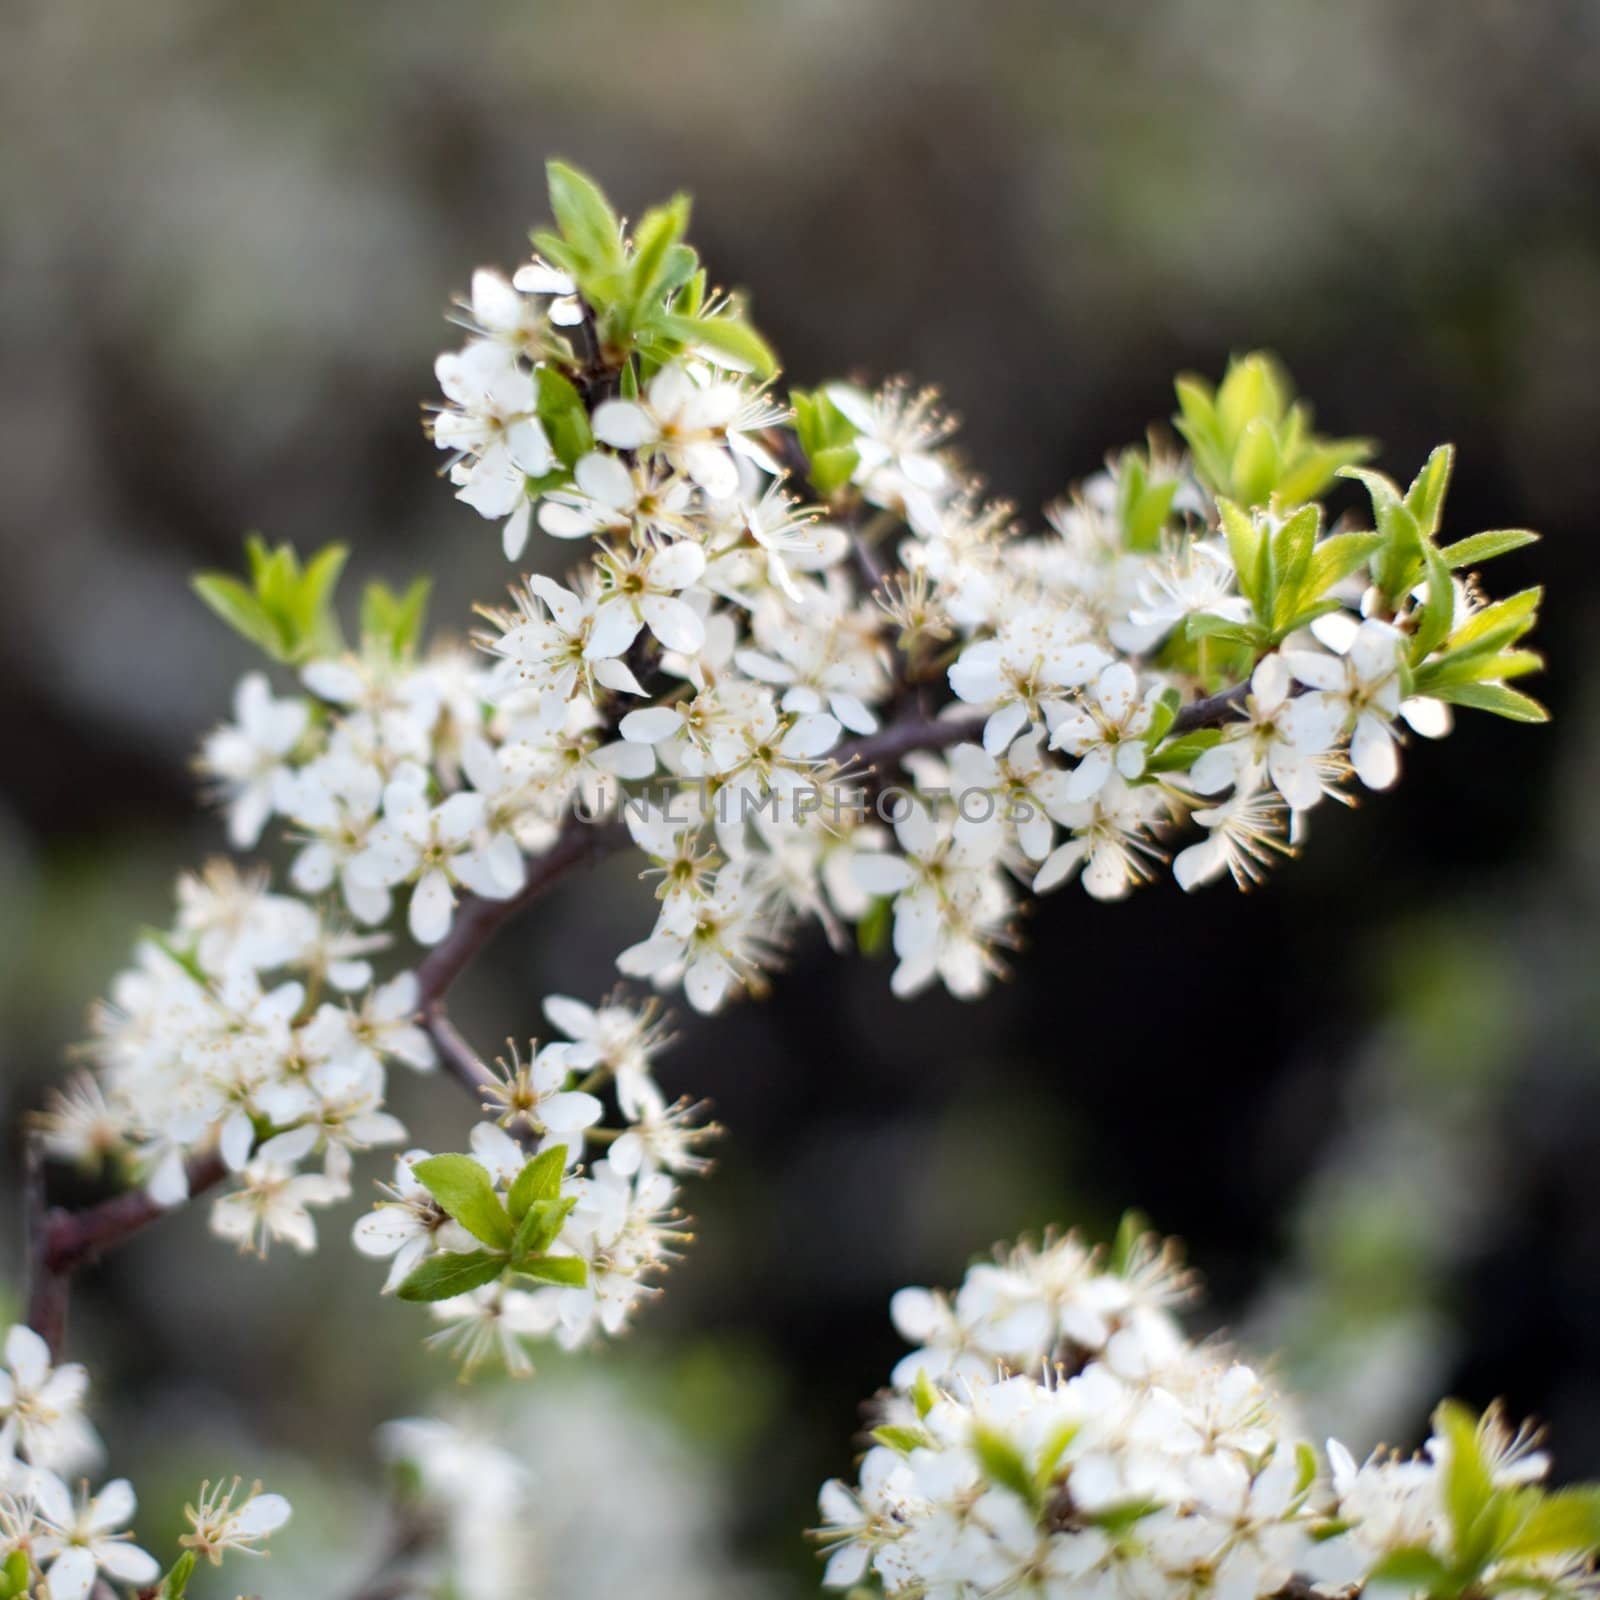 An image of beautiful white flowers of cherry-tree